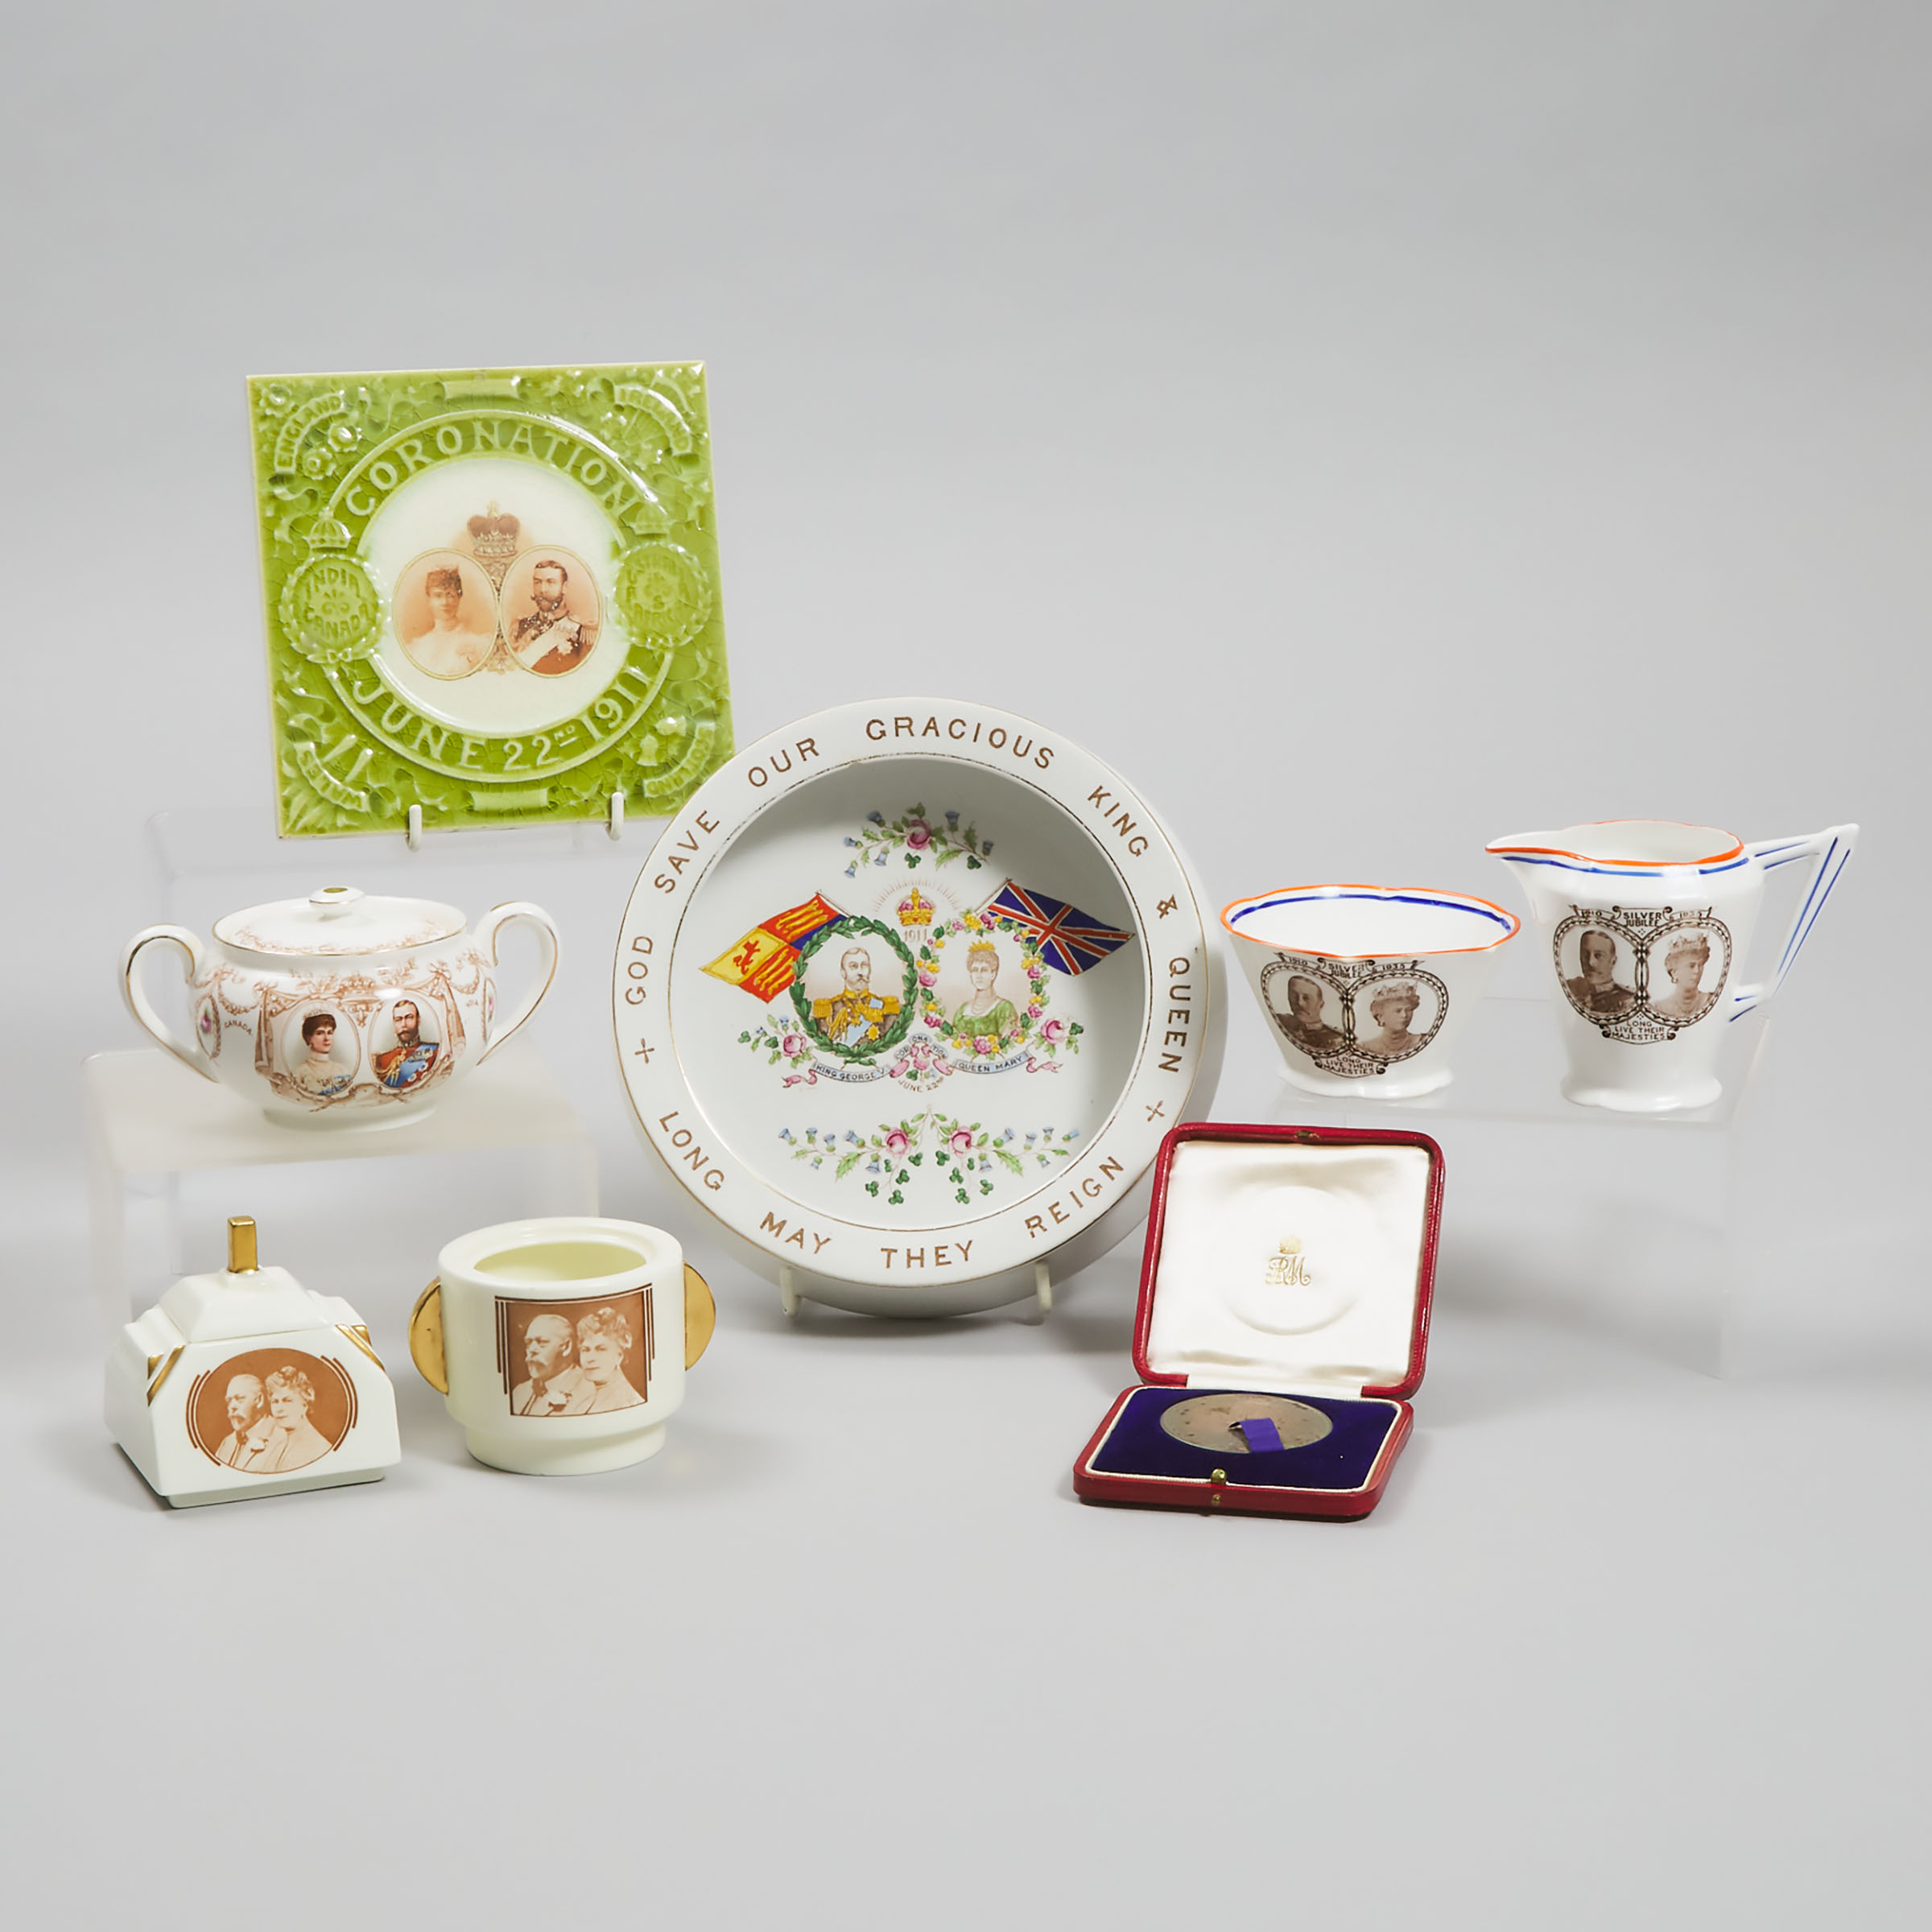 Group of George V and Mary Souvenir Wares, early 20th cetnury